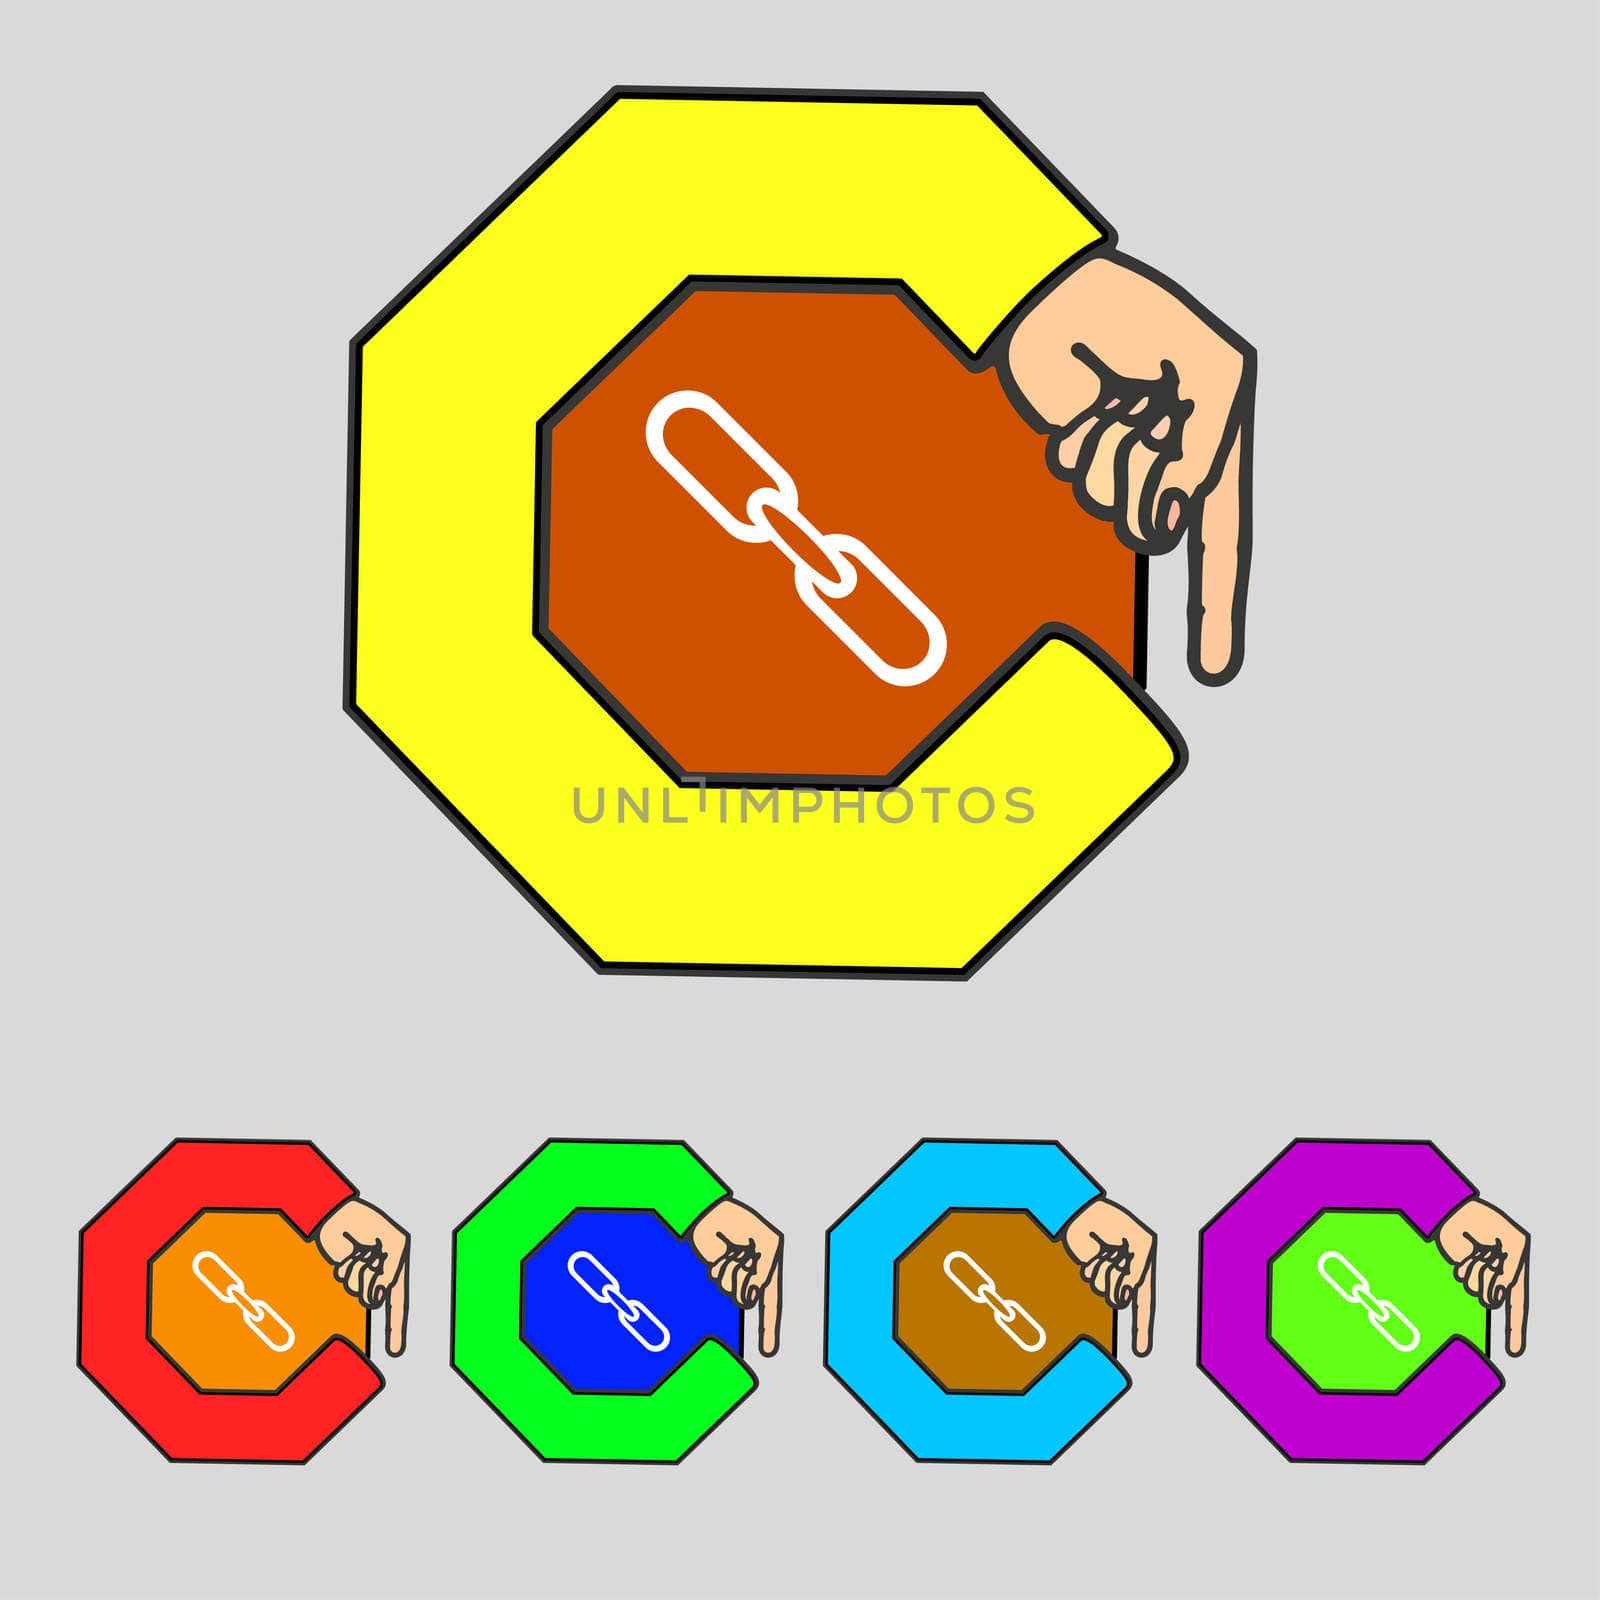 Link sign icon. Hyperlink chain symbol. Set colourful buttons. illustration